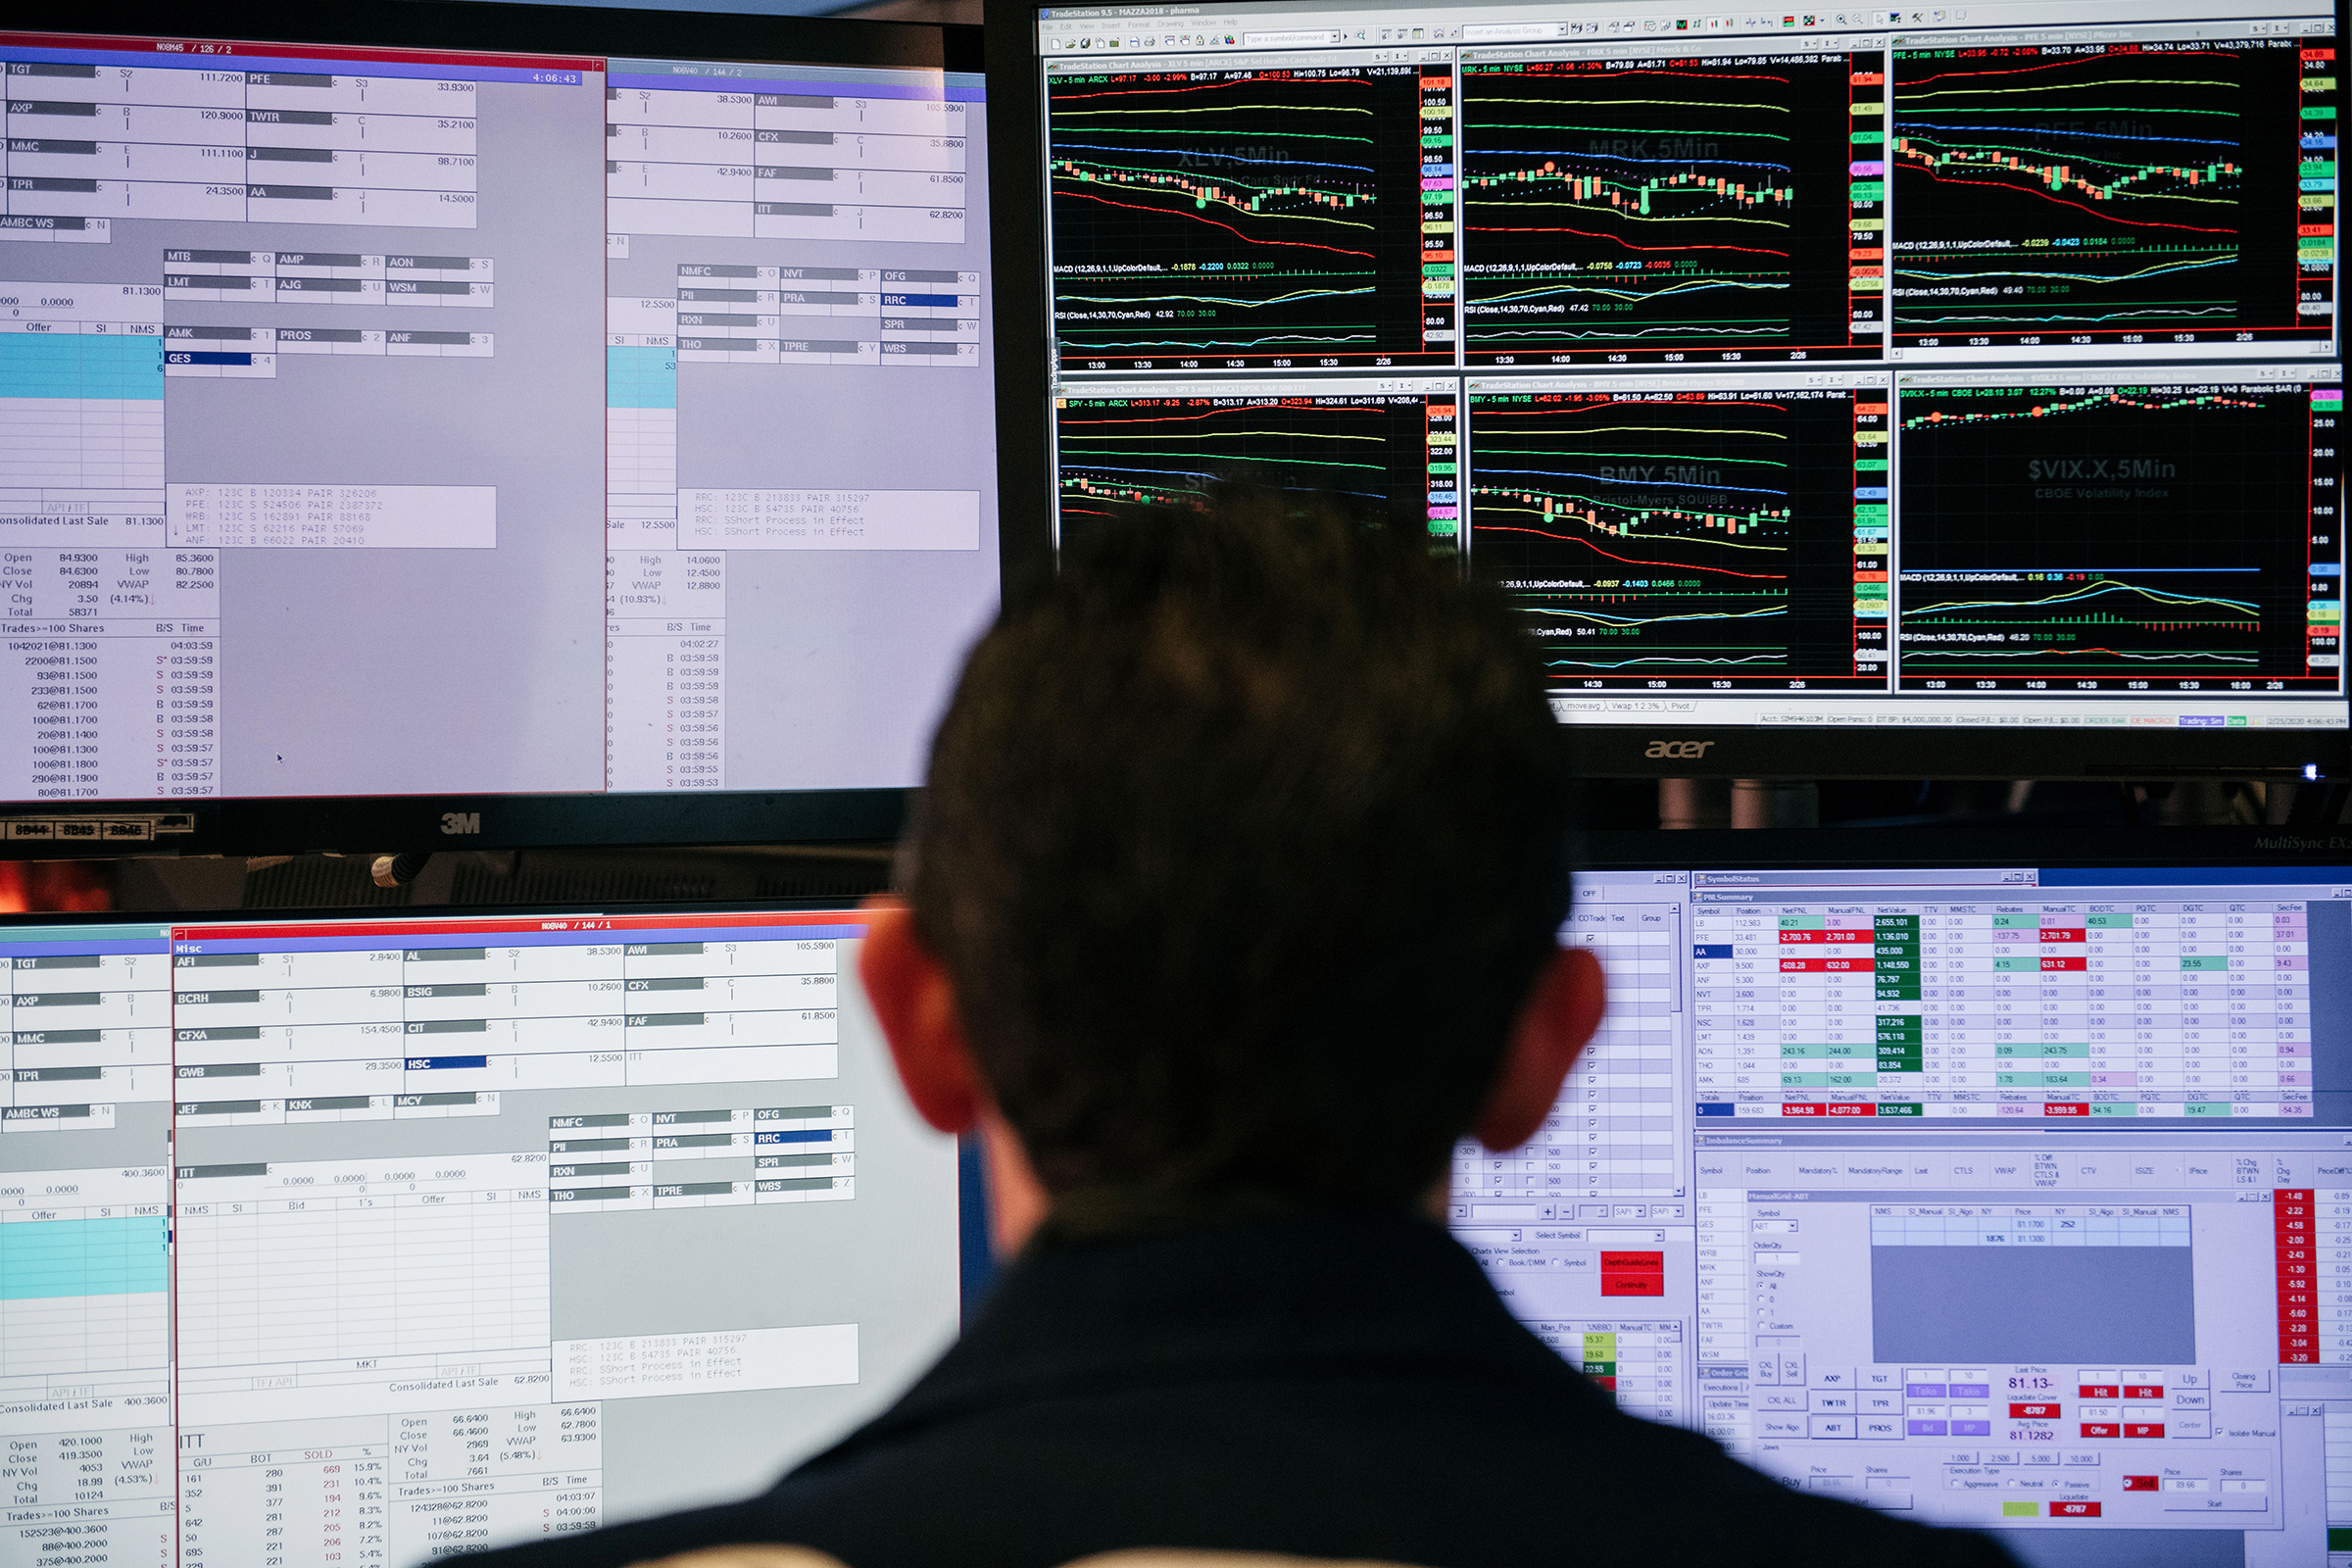 Traders work through the closing minutes of trading on the New York Stock Exchange floor on February 25, 2020 in New York City. (Scott Heins—Getty Images)